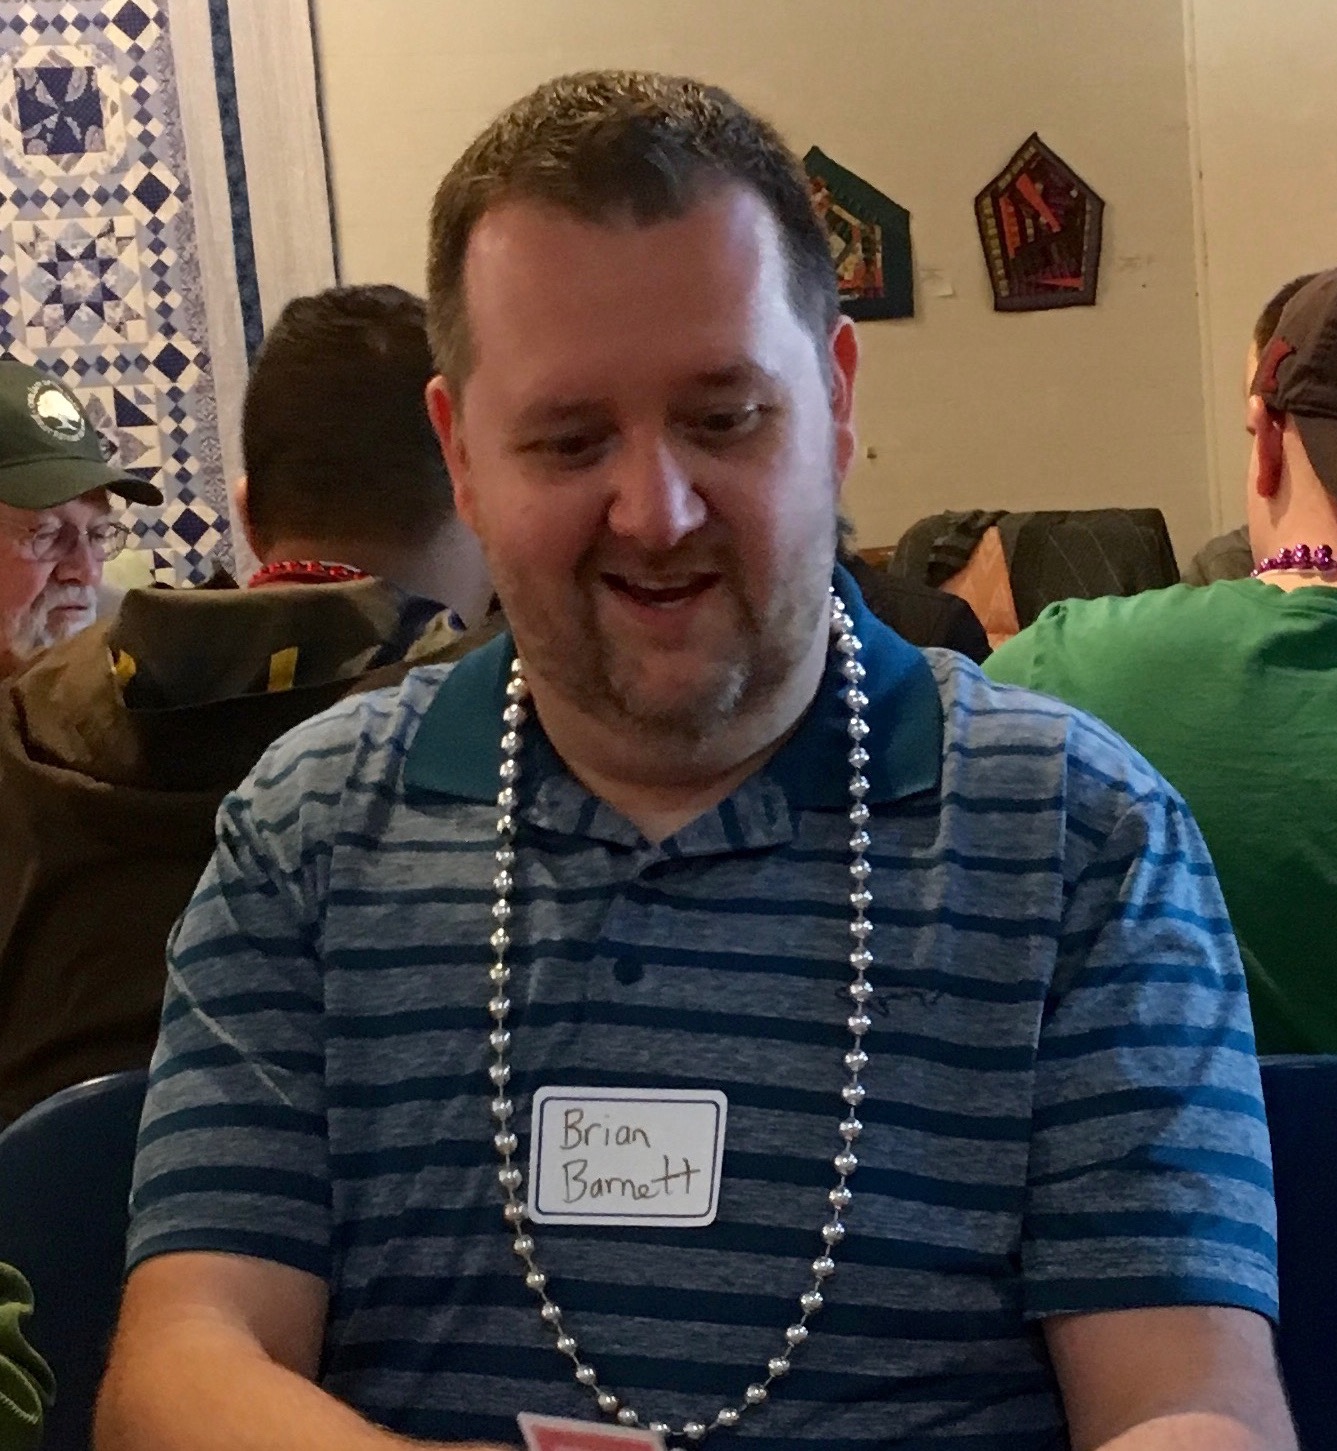 Picture of Brian Barnett sitting at a table with playing cards in his hands with a nametag in the center of his chest and a 